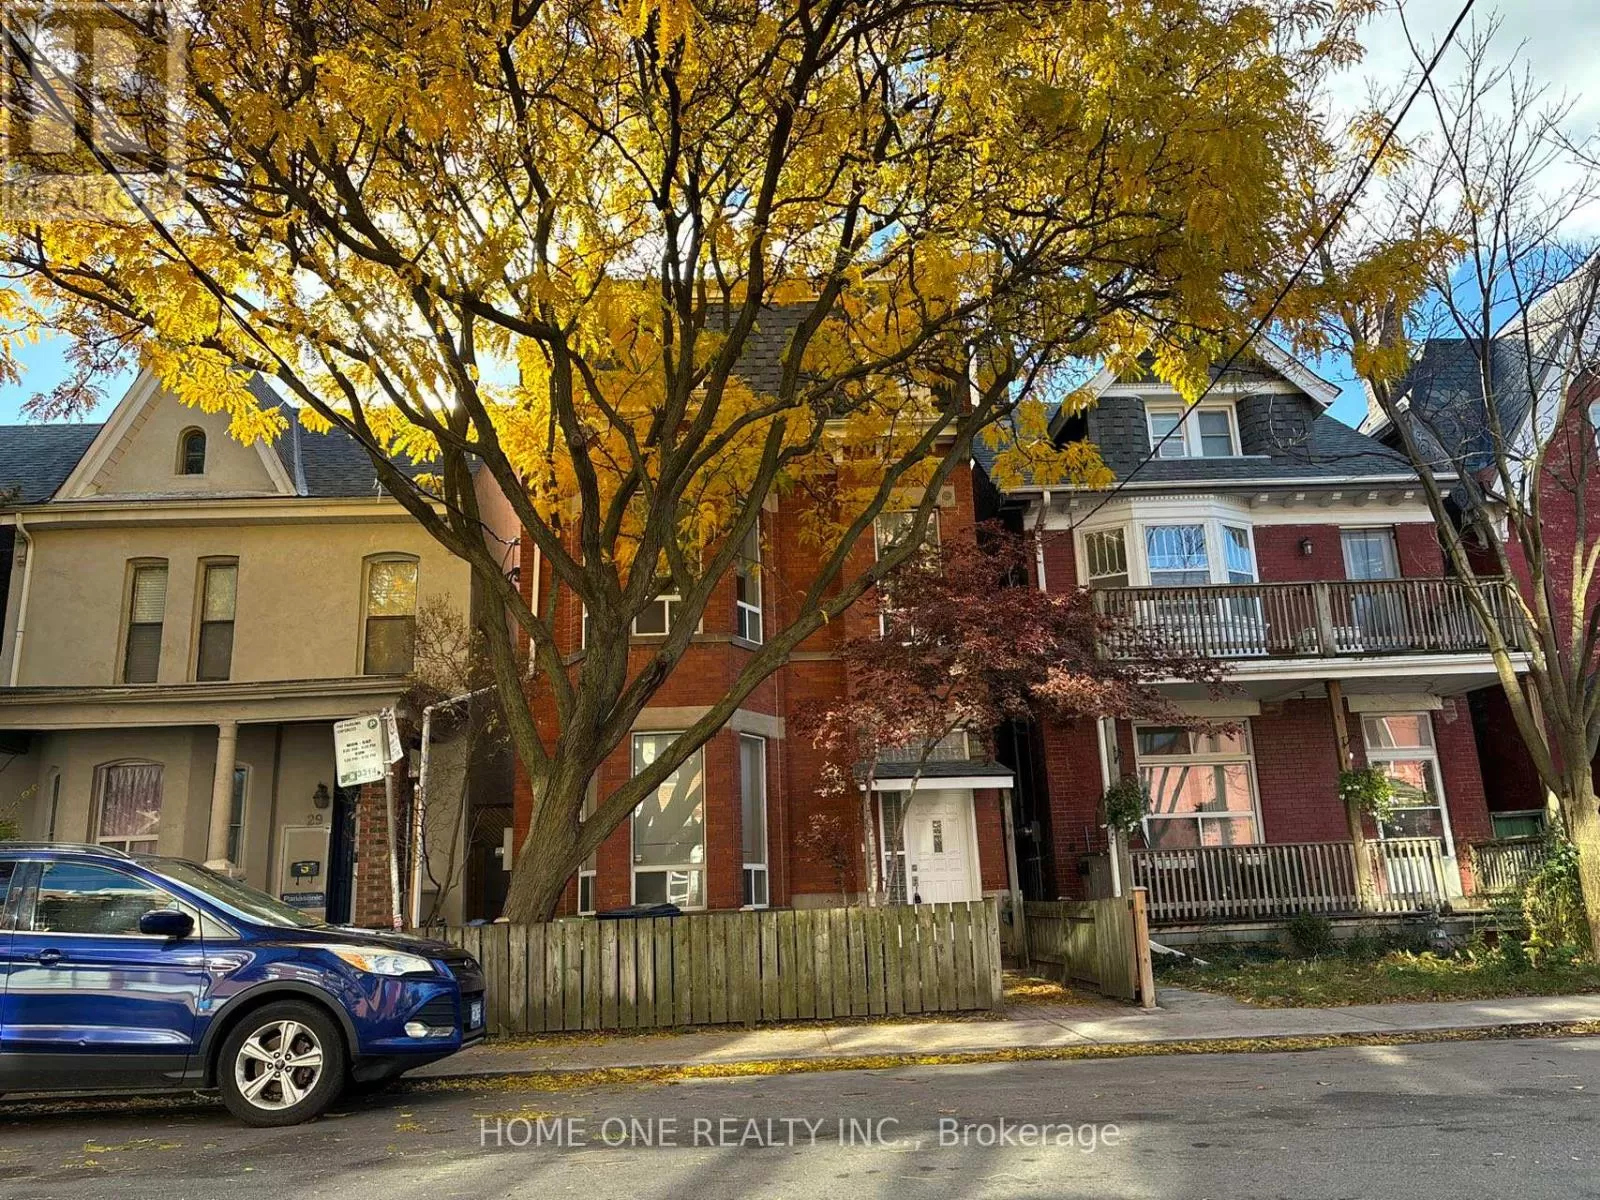 Other for rent: 302 - 31 D'arcy Street, Toronto, Ontario M5T 1J8